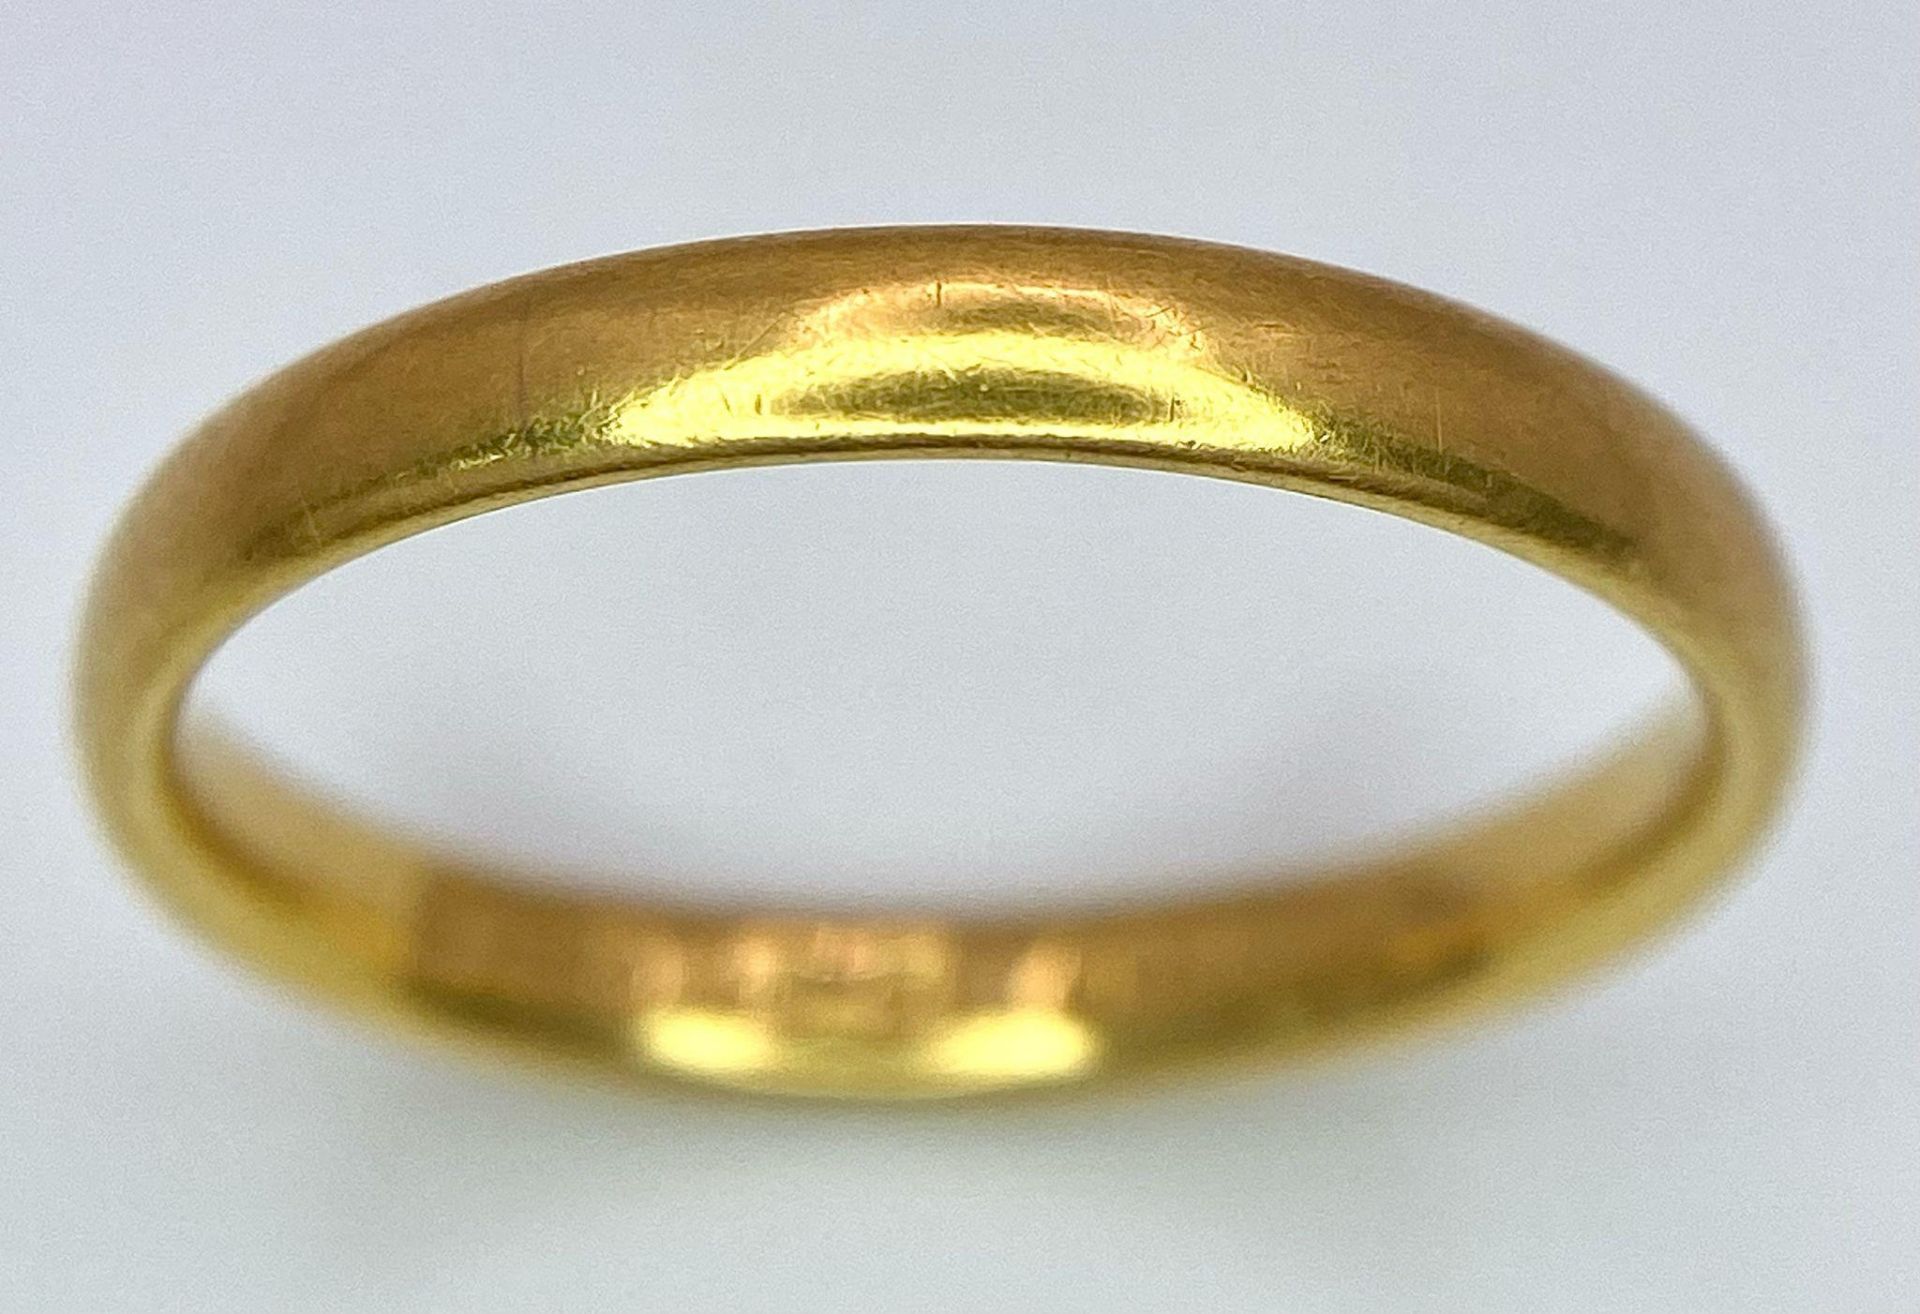 A Vintage 22k Yellow Gold Band Ring. 3mm width. Size L. 2.85g weight. Full UK hallmarks. - Image 2 of 4